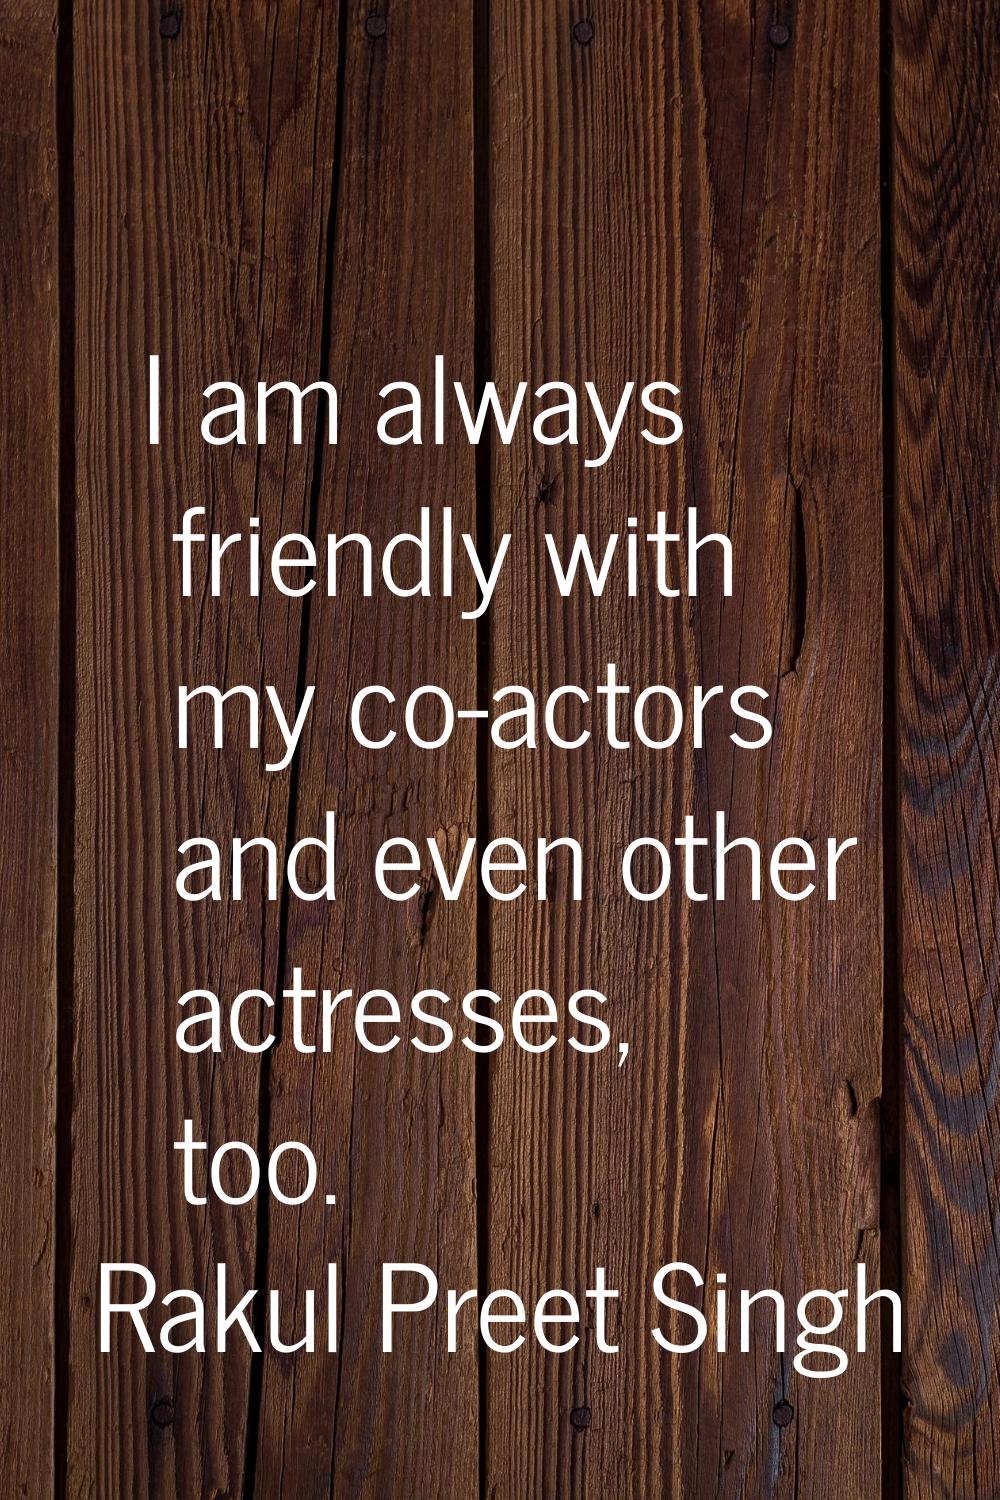 I am always friendly with my co-actors and even other actresses, too.